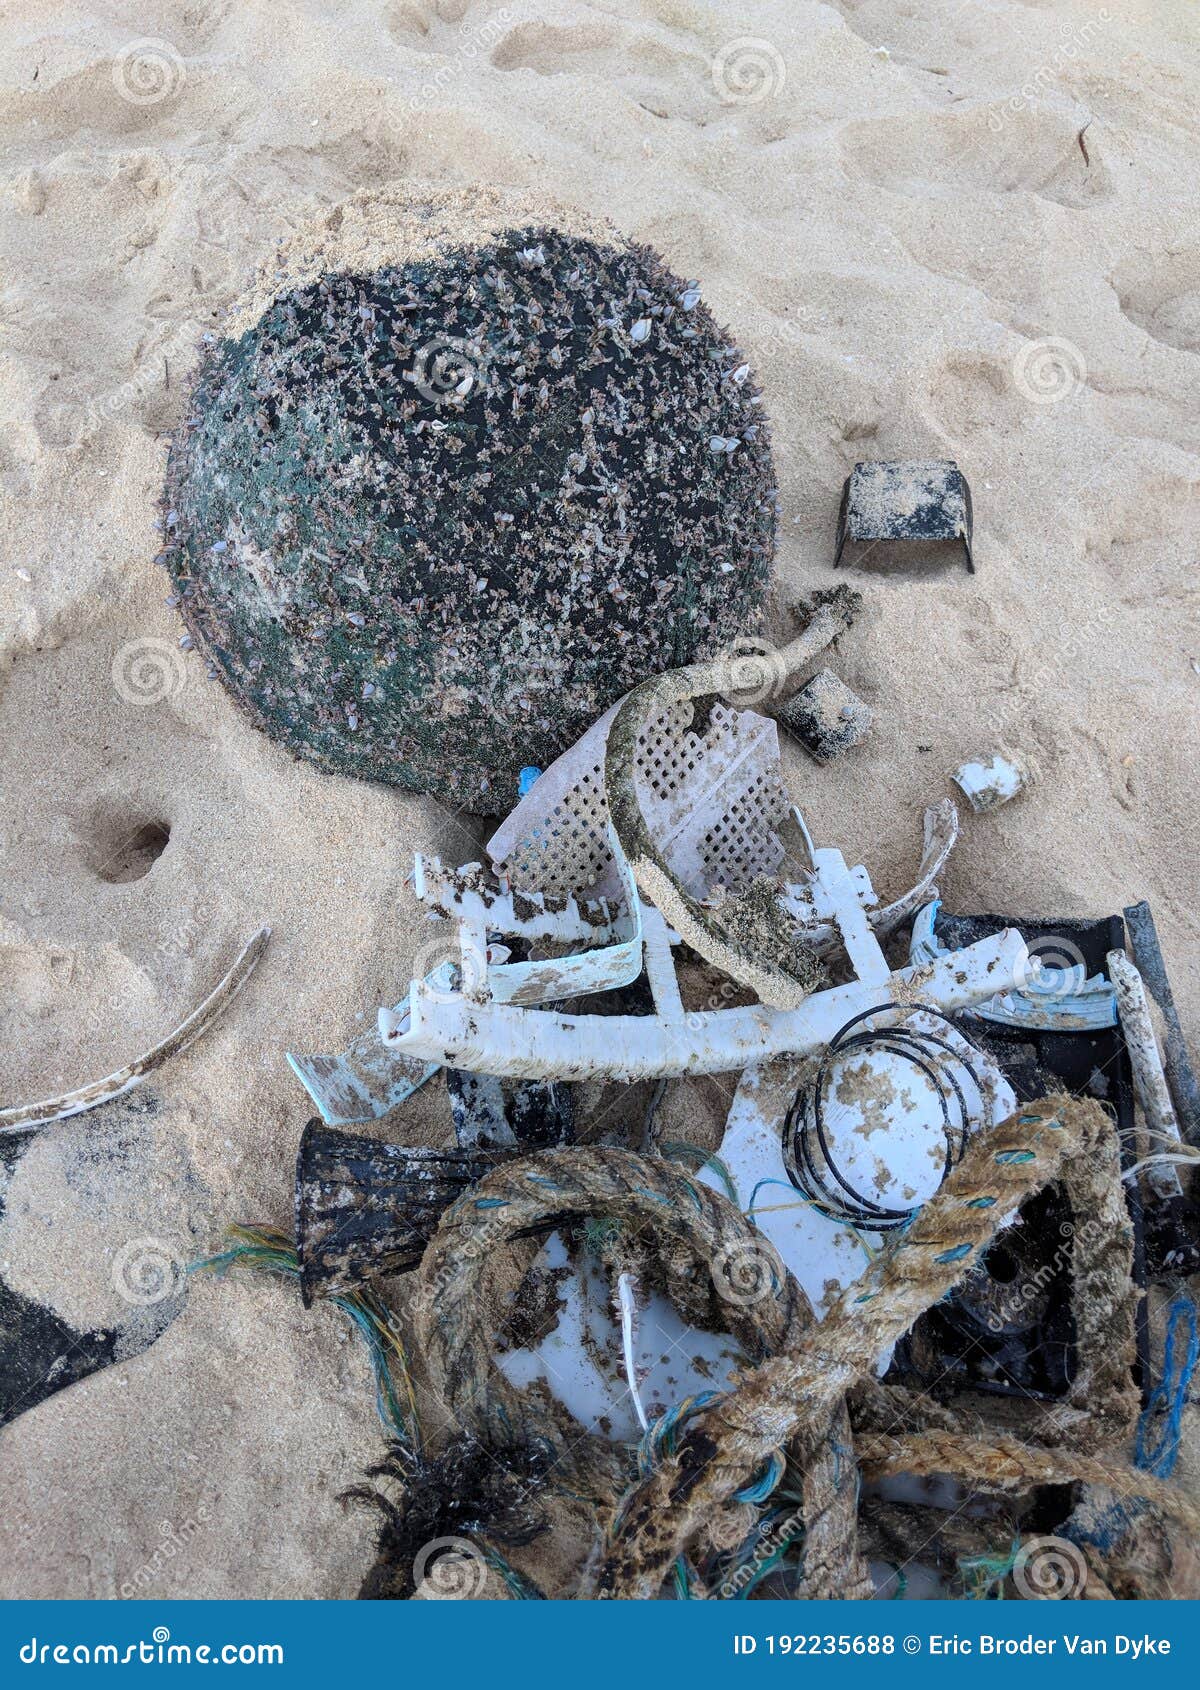 Bundle of Plastic Buoy, Fishing Nets, Lines, and Other Trash